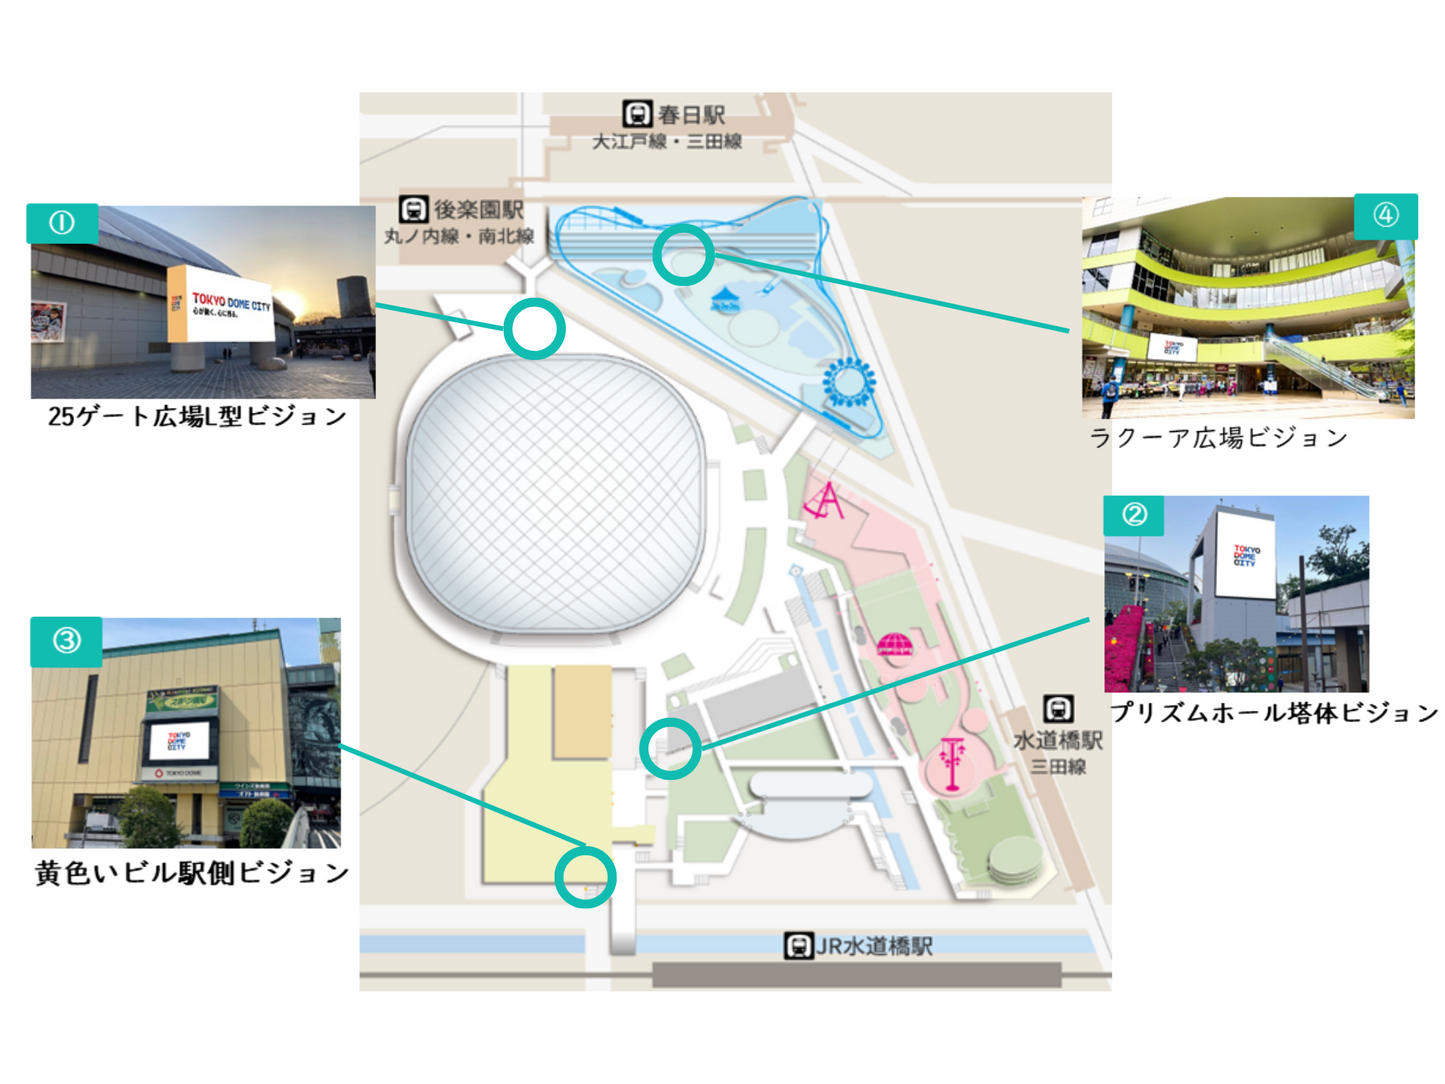 Tokyo Dome City Visions Basic Set Open Yellow Building Station Vision